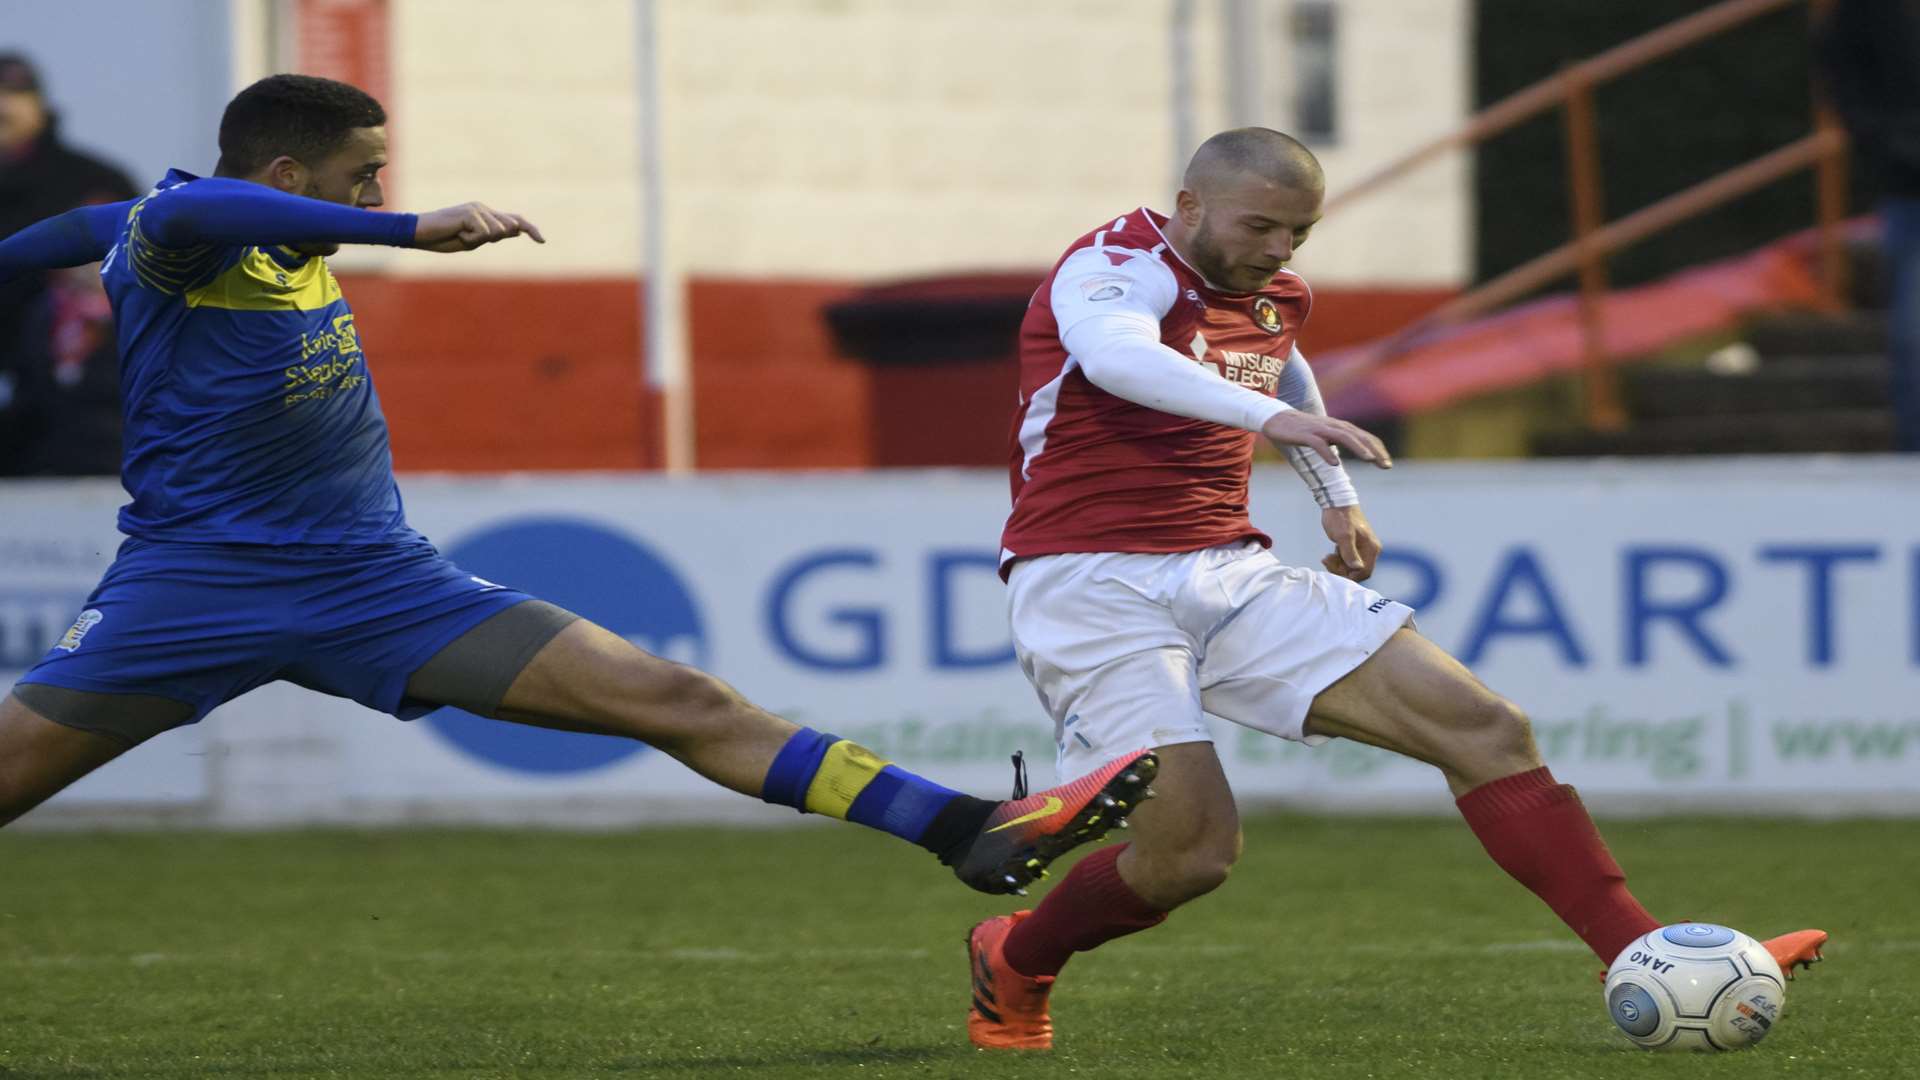 Luke Coulson came off the bench to score Ebbsfleet's winner Picture: Andy Payton